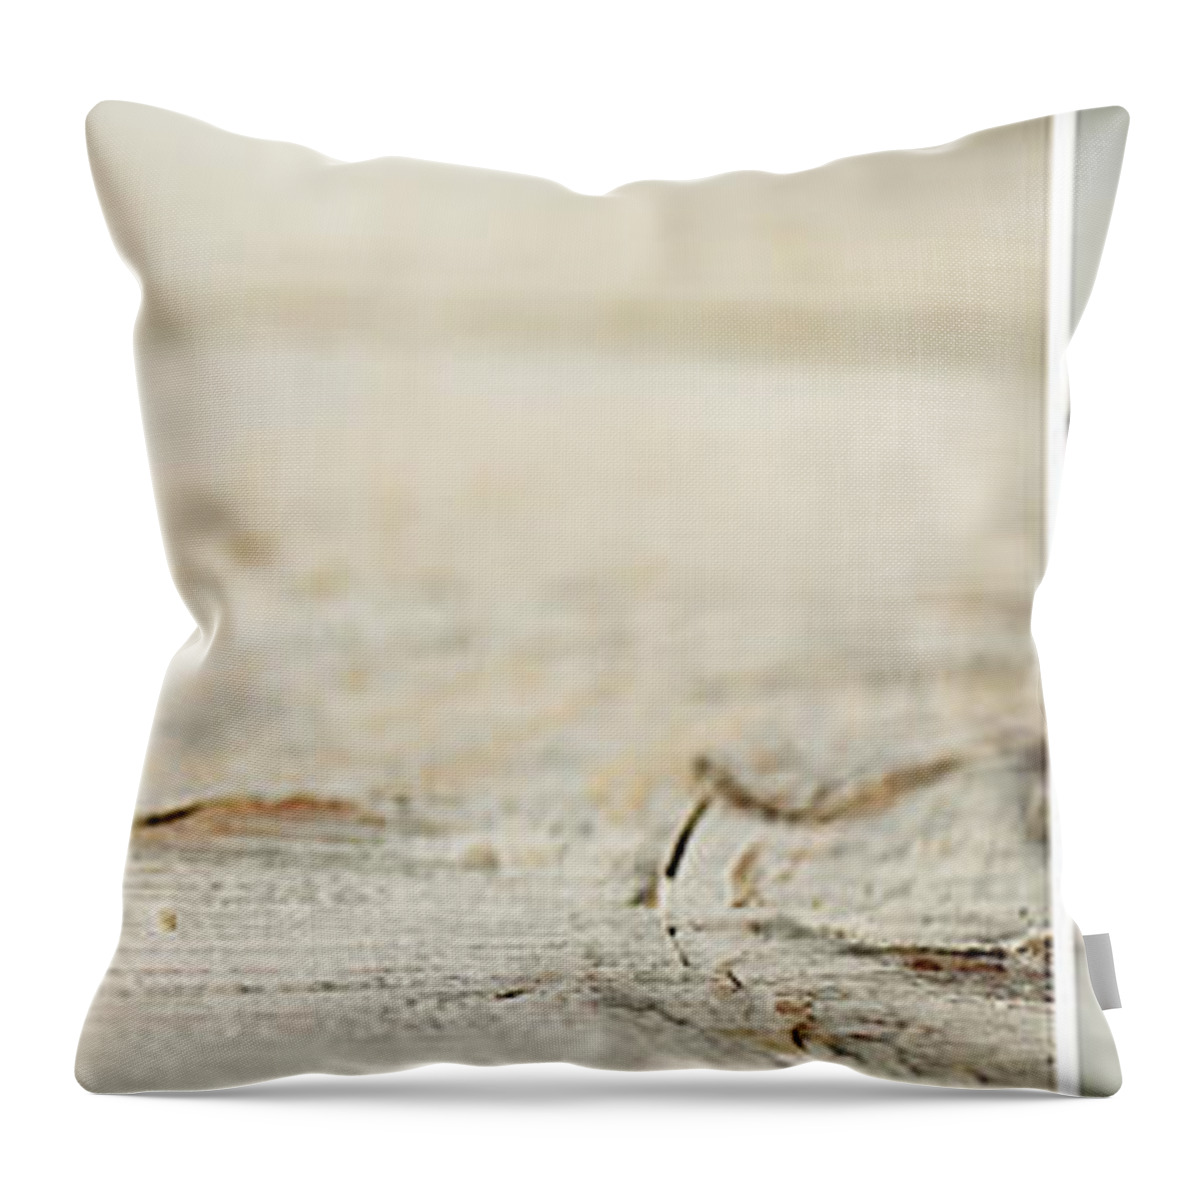 Panorama Throw Pillow featuring the photograph Cherry by Nailia Schwarz